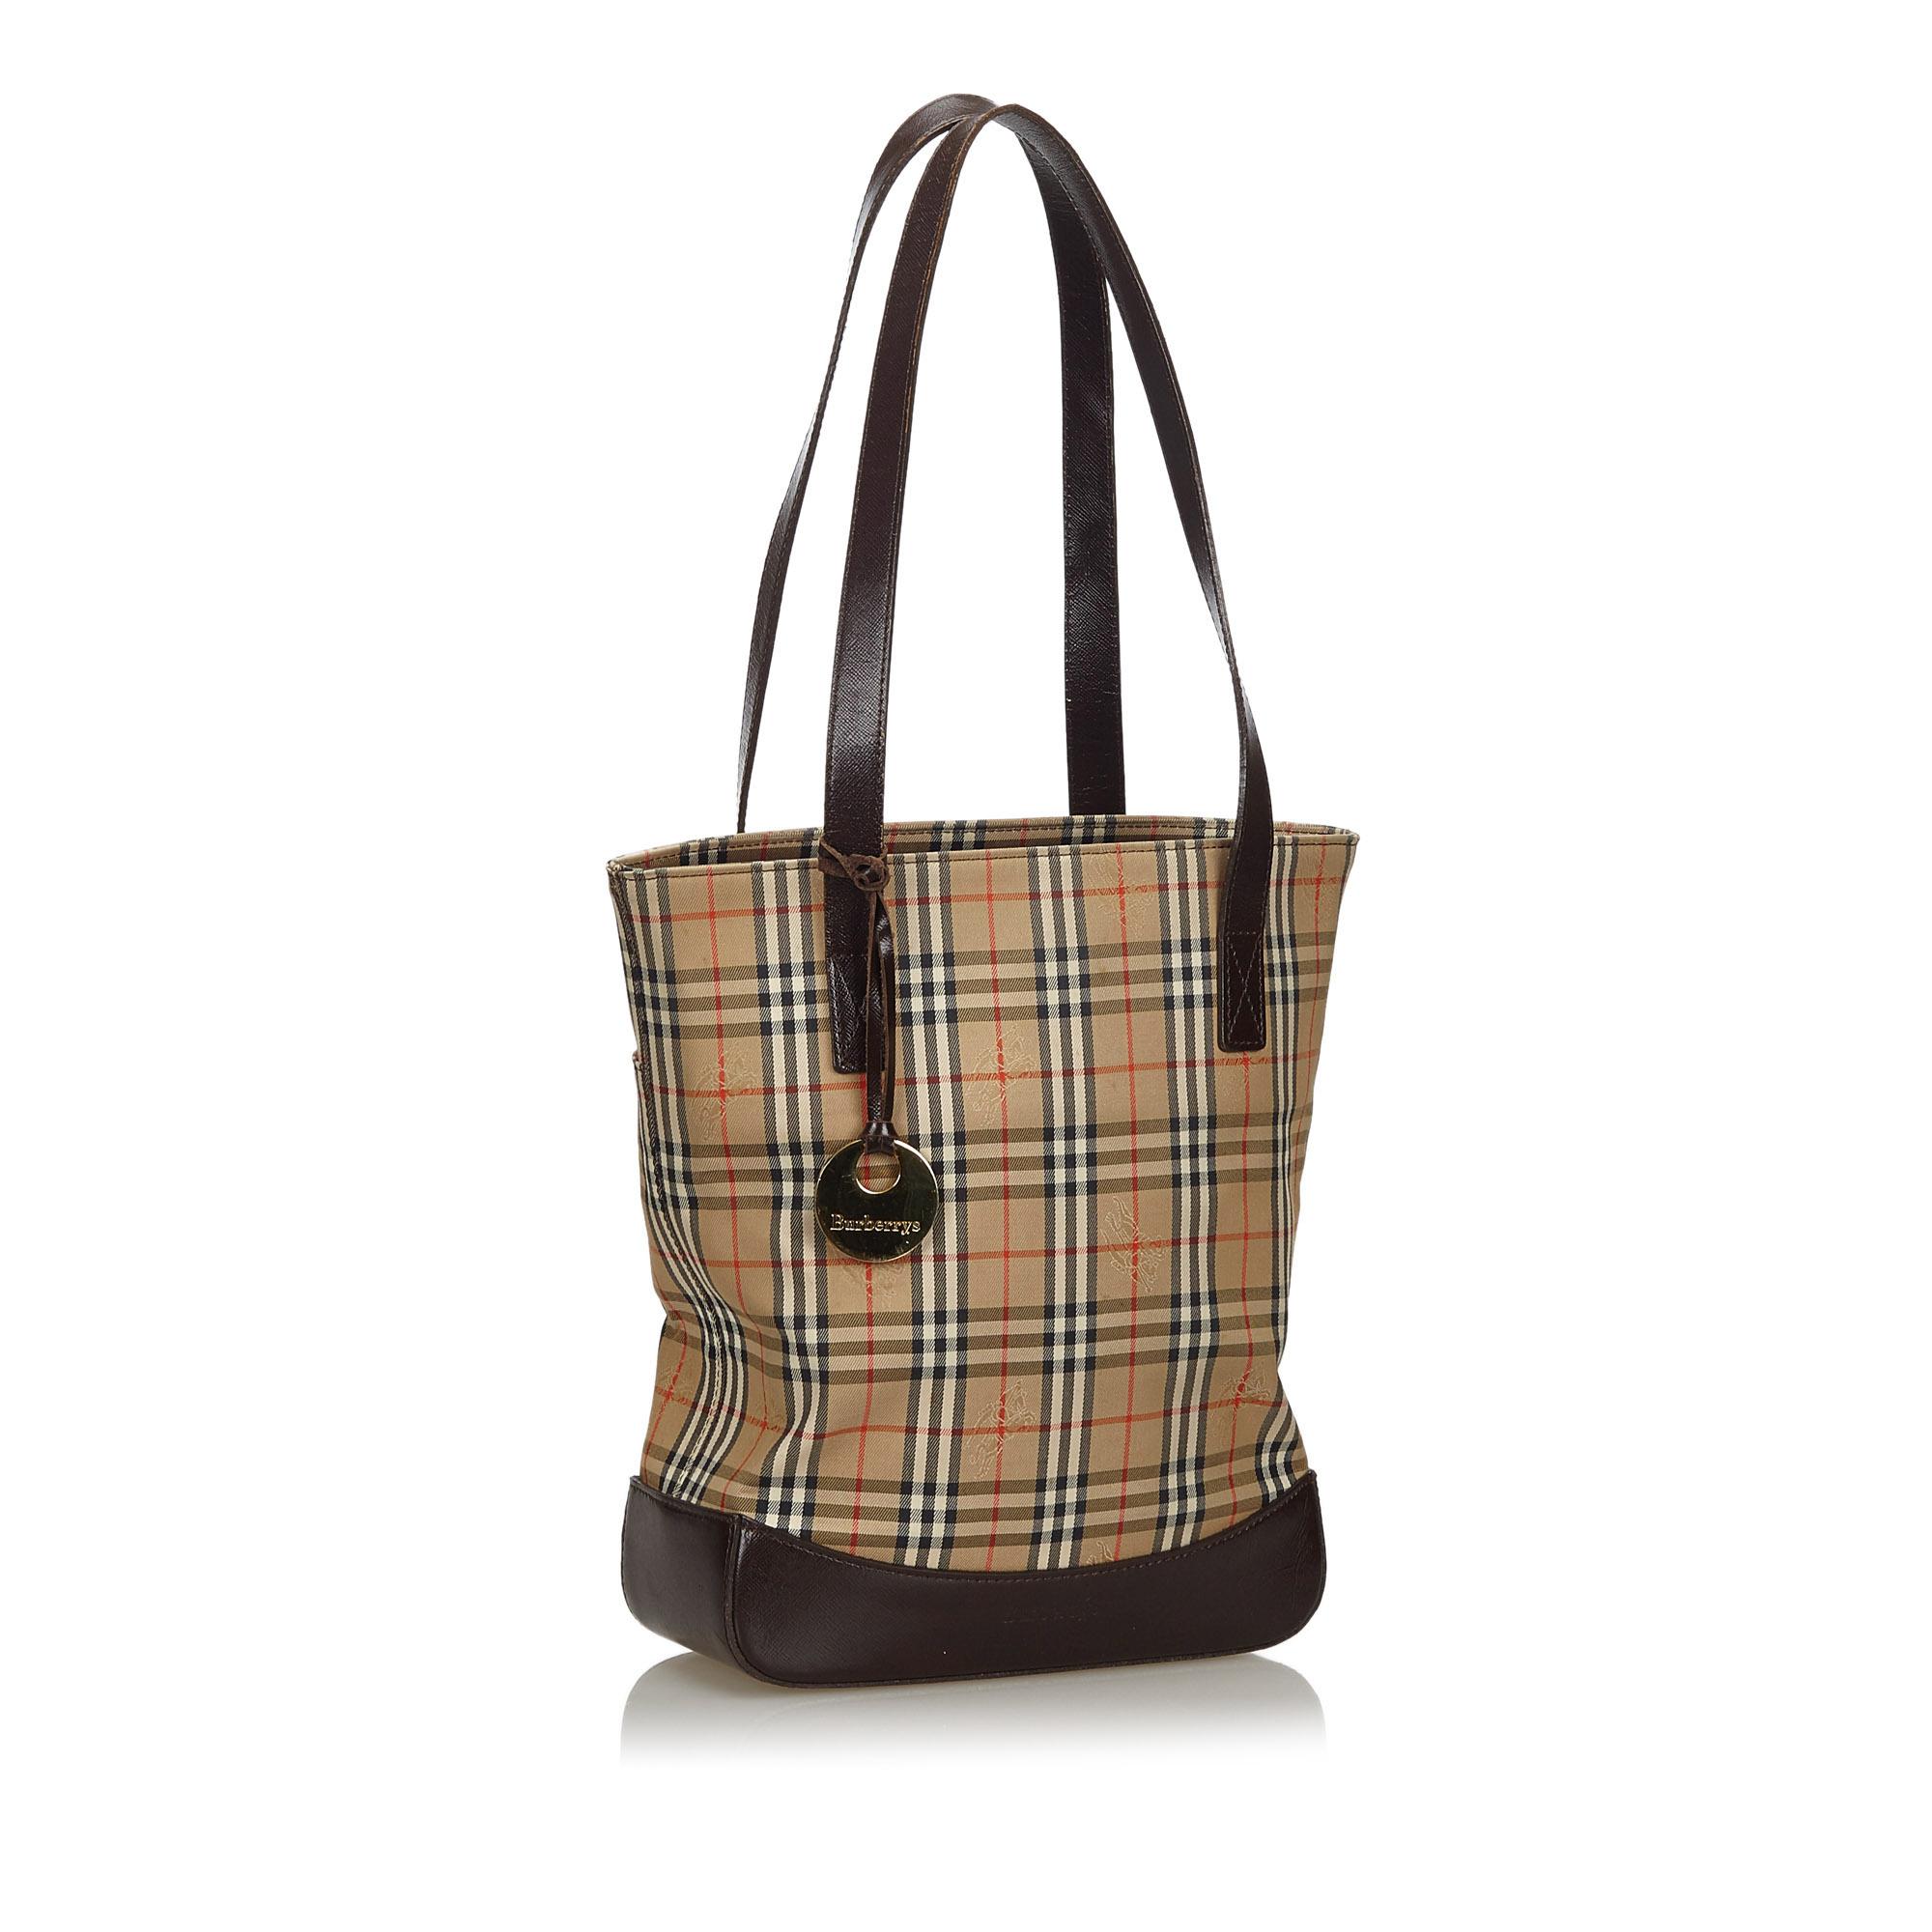 This tote bag features a canvas body with leather trim, a flat leather straps, an open top with a magnetic snap button closure, and an interior zip pocket. It carries as B condition rating.

Inclusions: 
This item does not come with